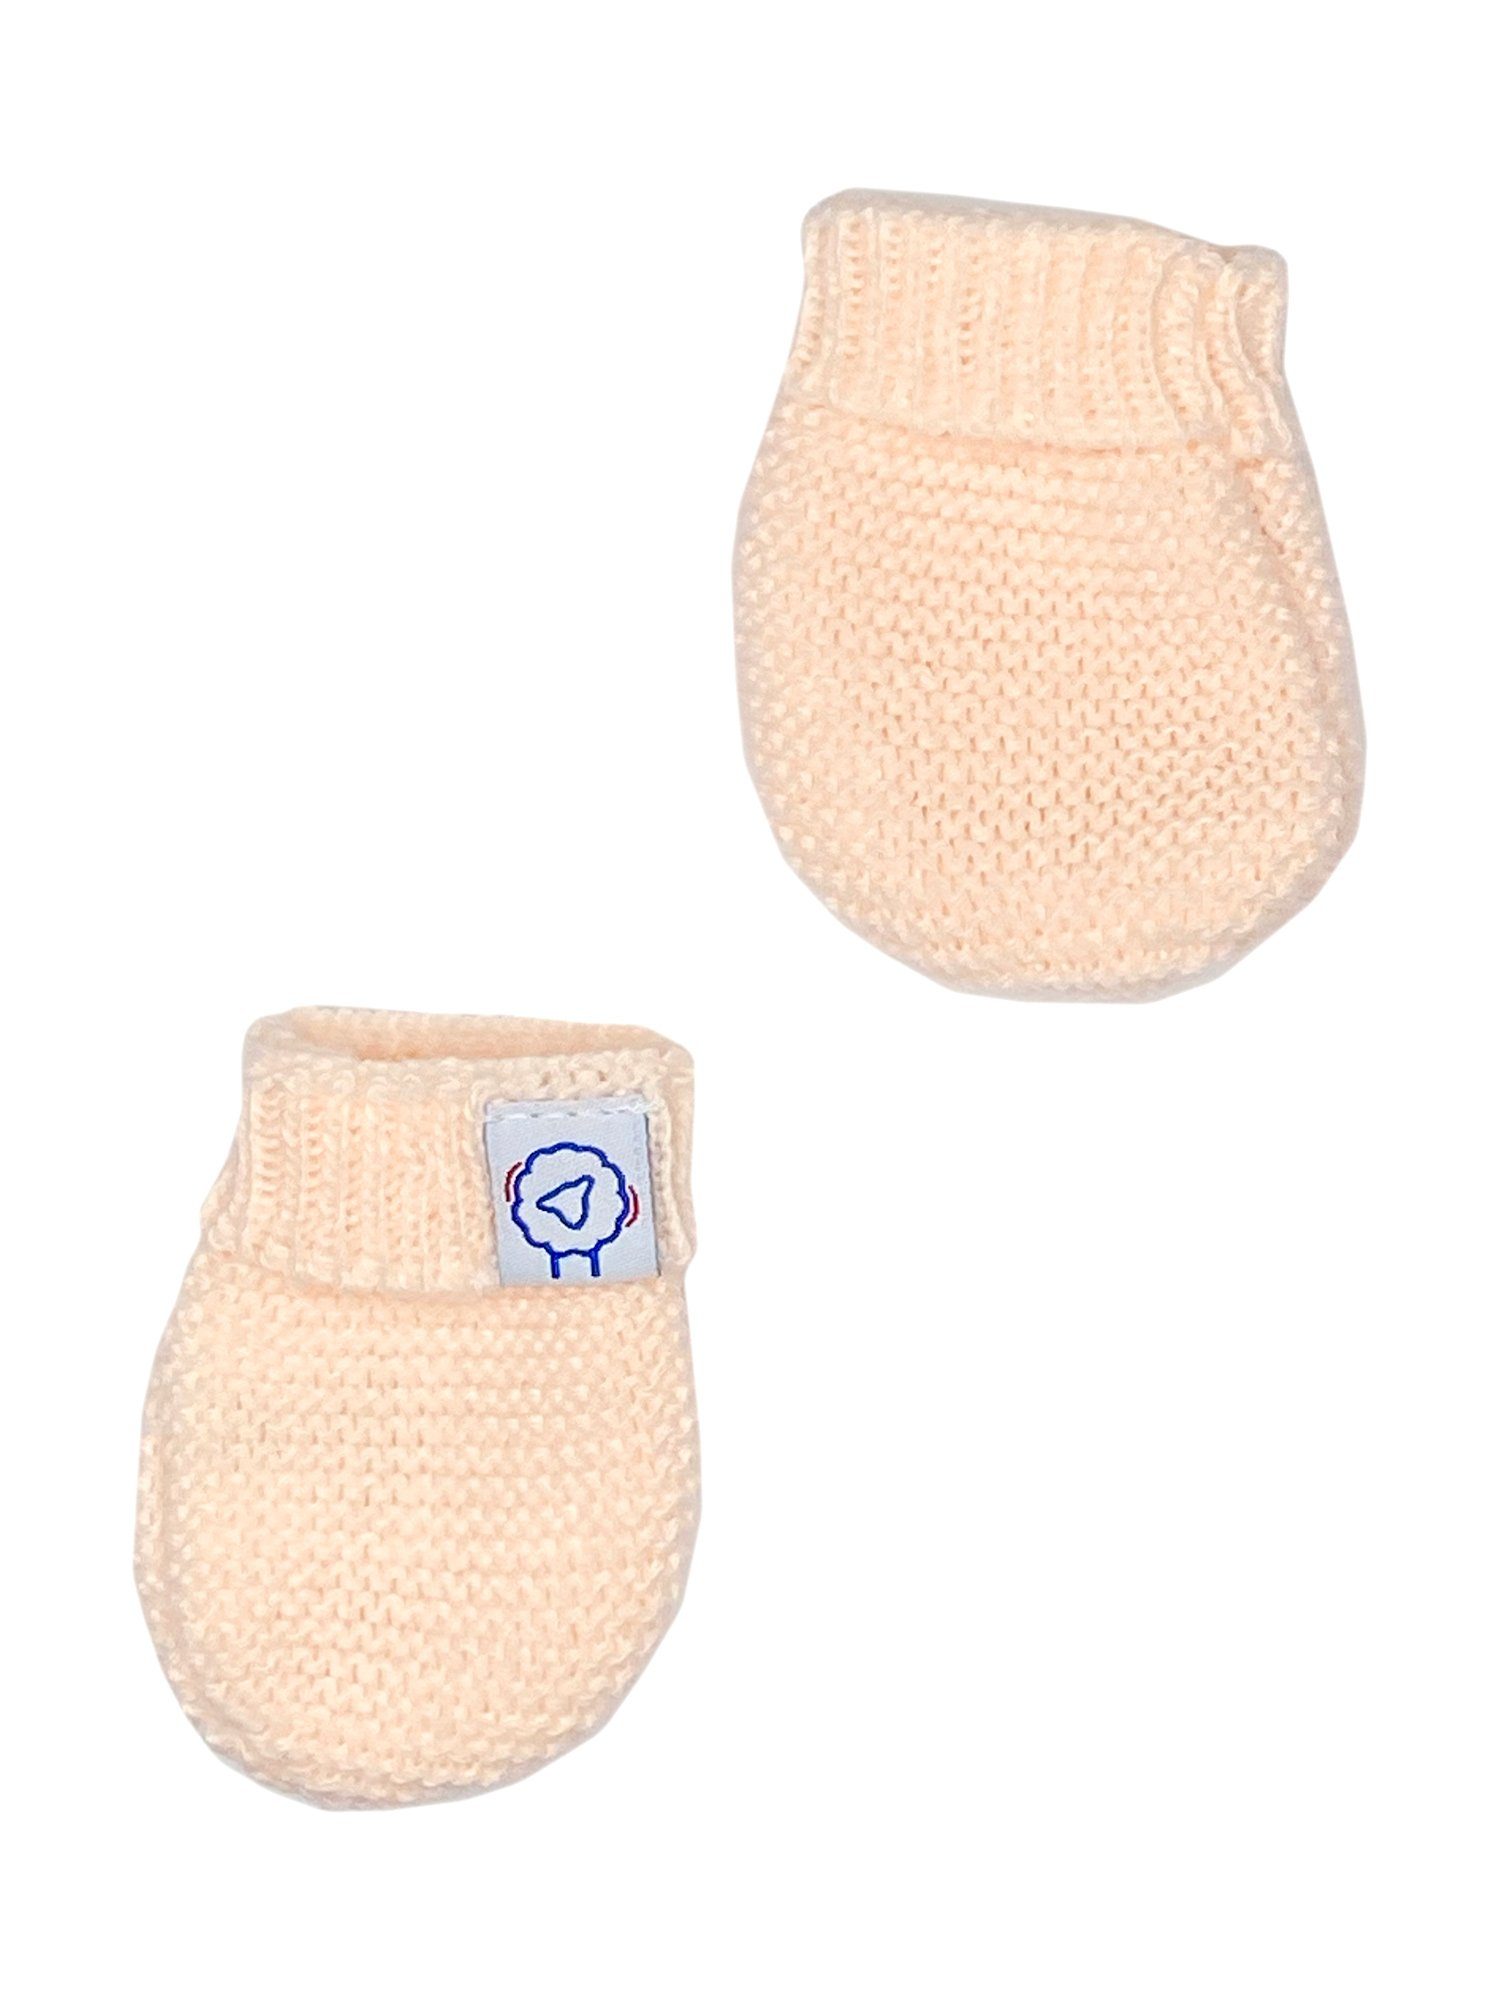 Peach Pink Knitted Gloves/Mittens Mittens La Manufacture de Layette 